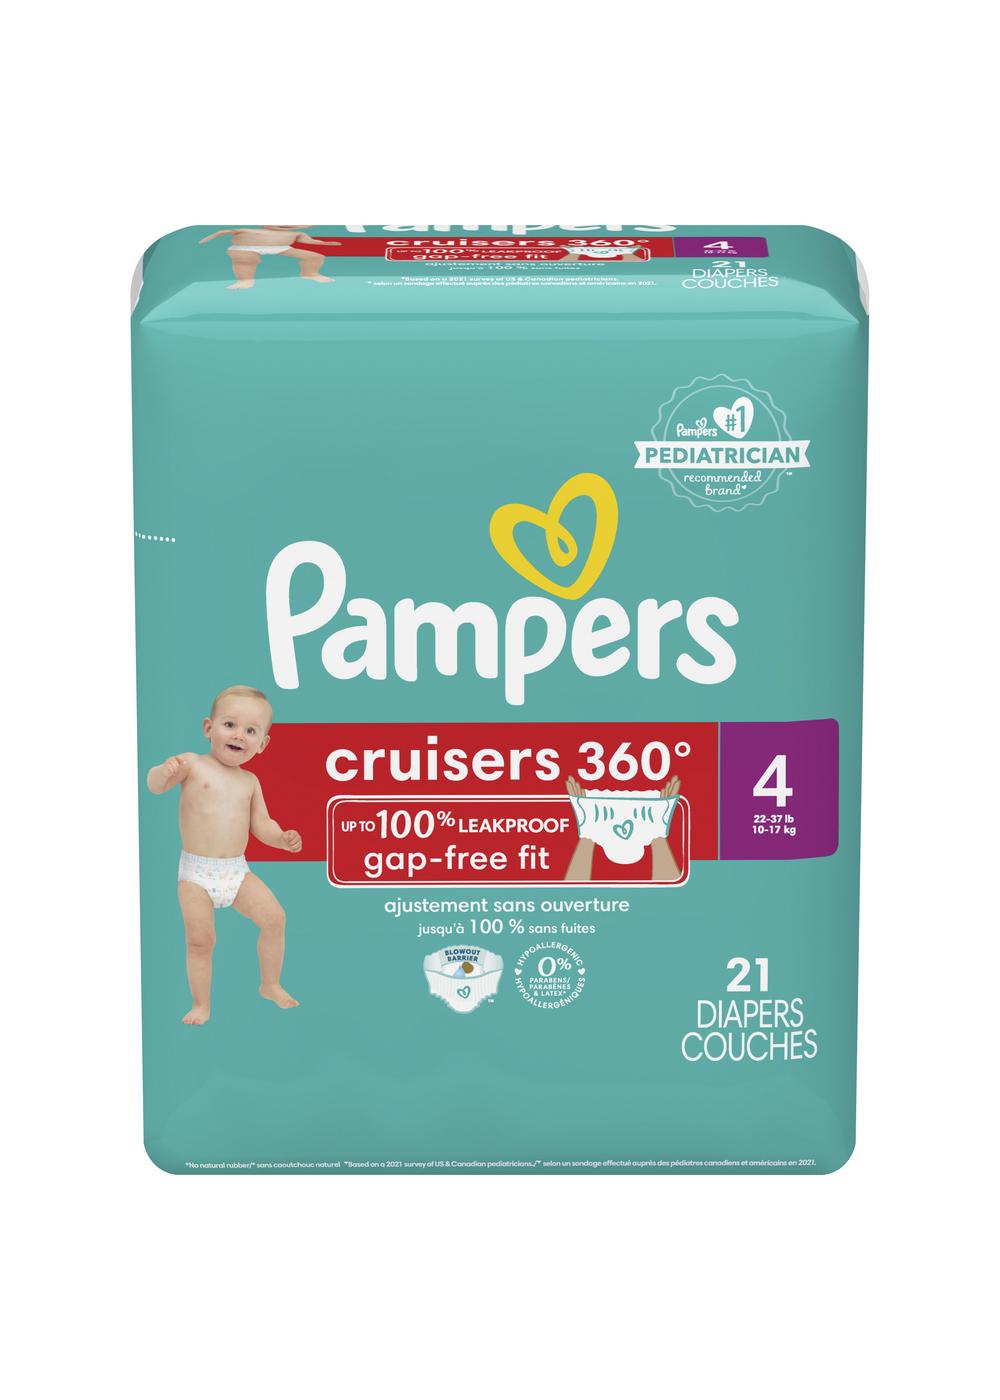 Pampers Cruisers 360 Diapers - Size 4; image 3 of 7